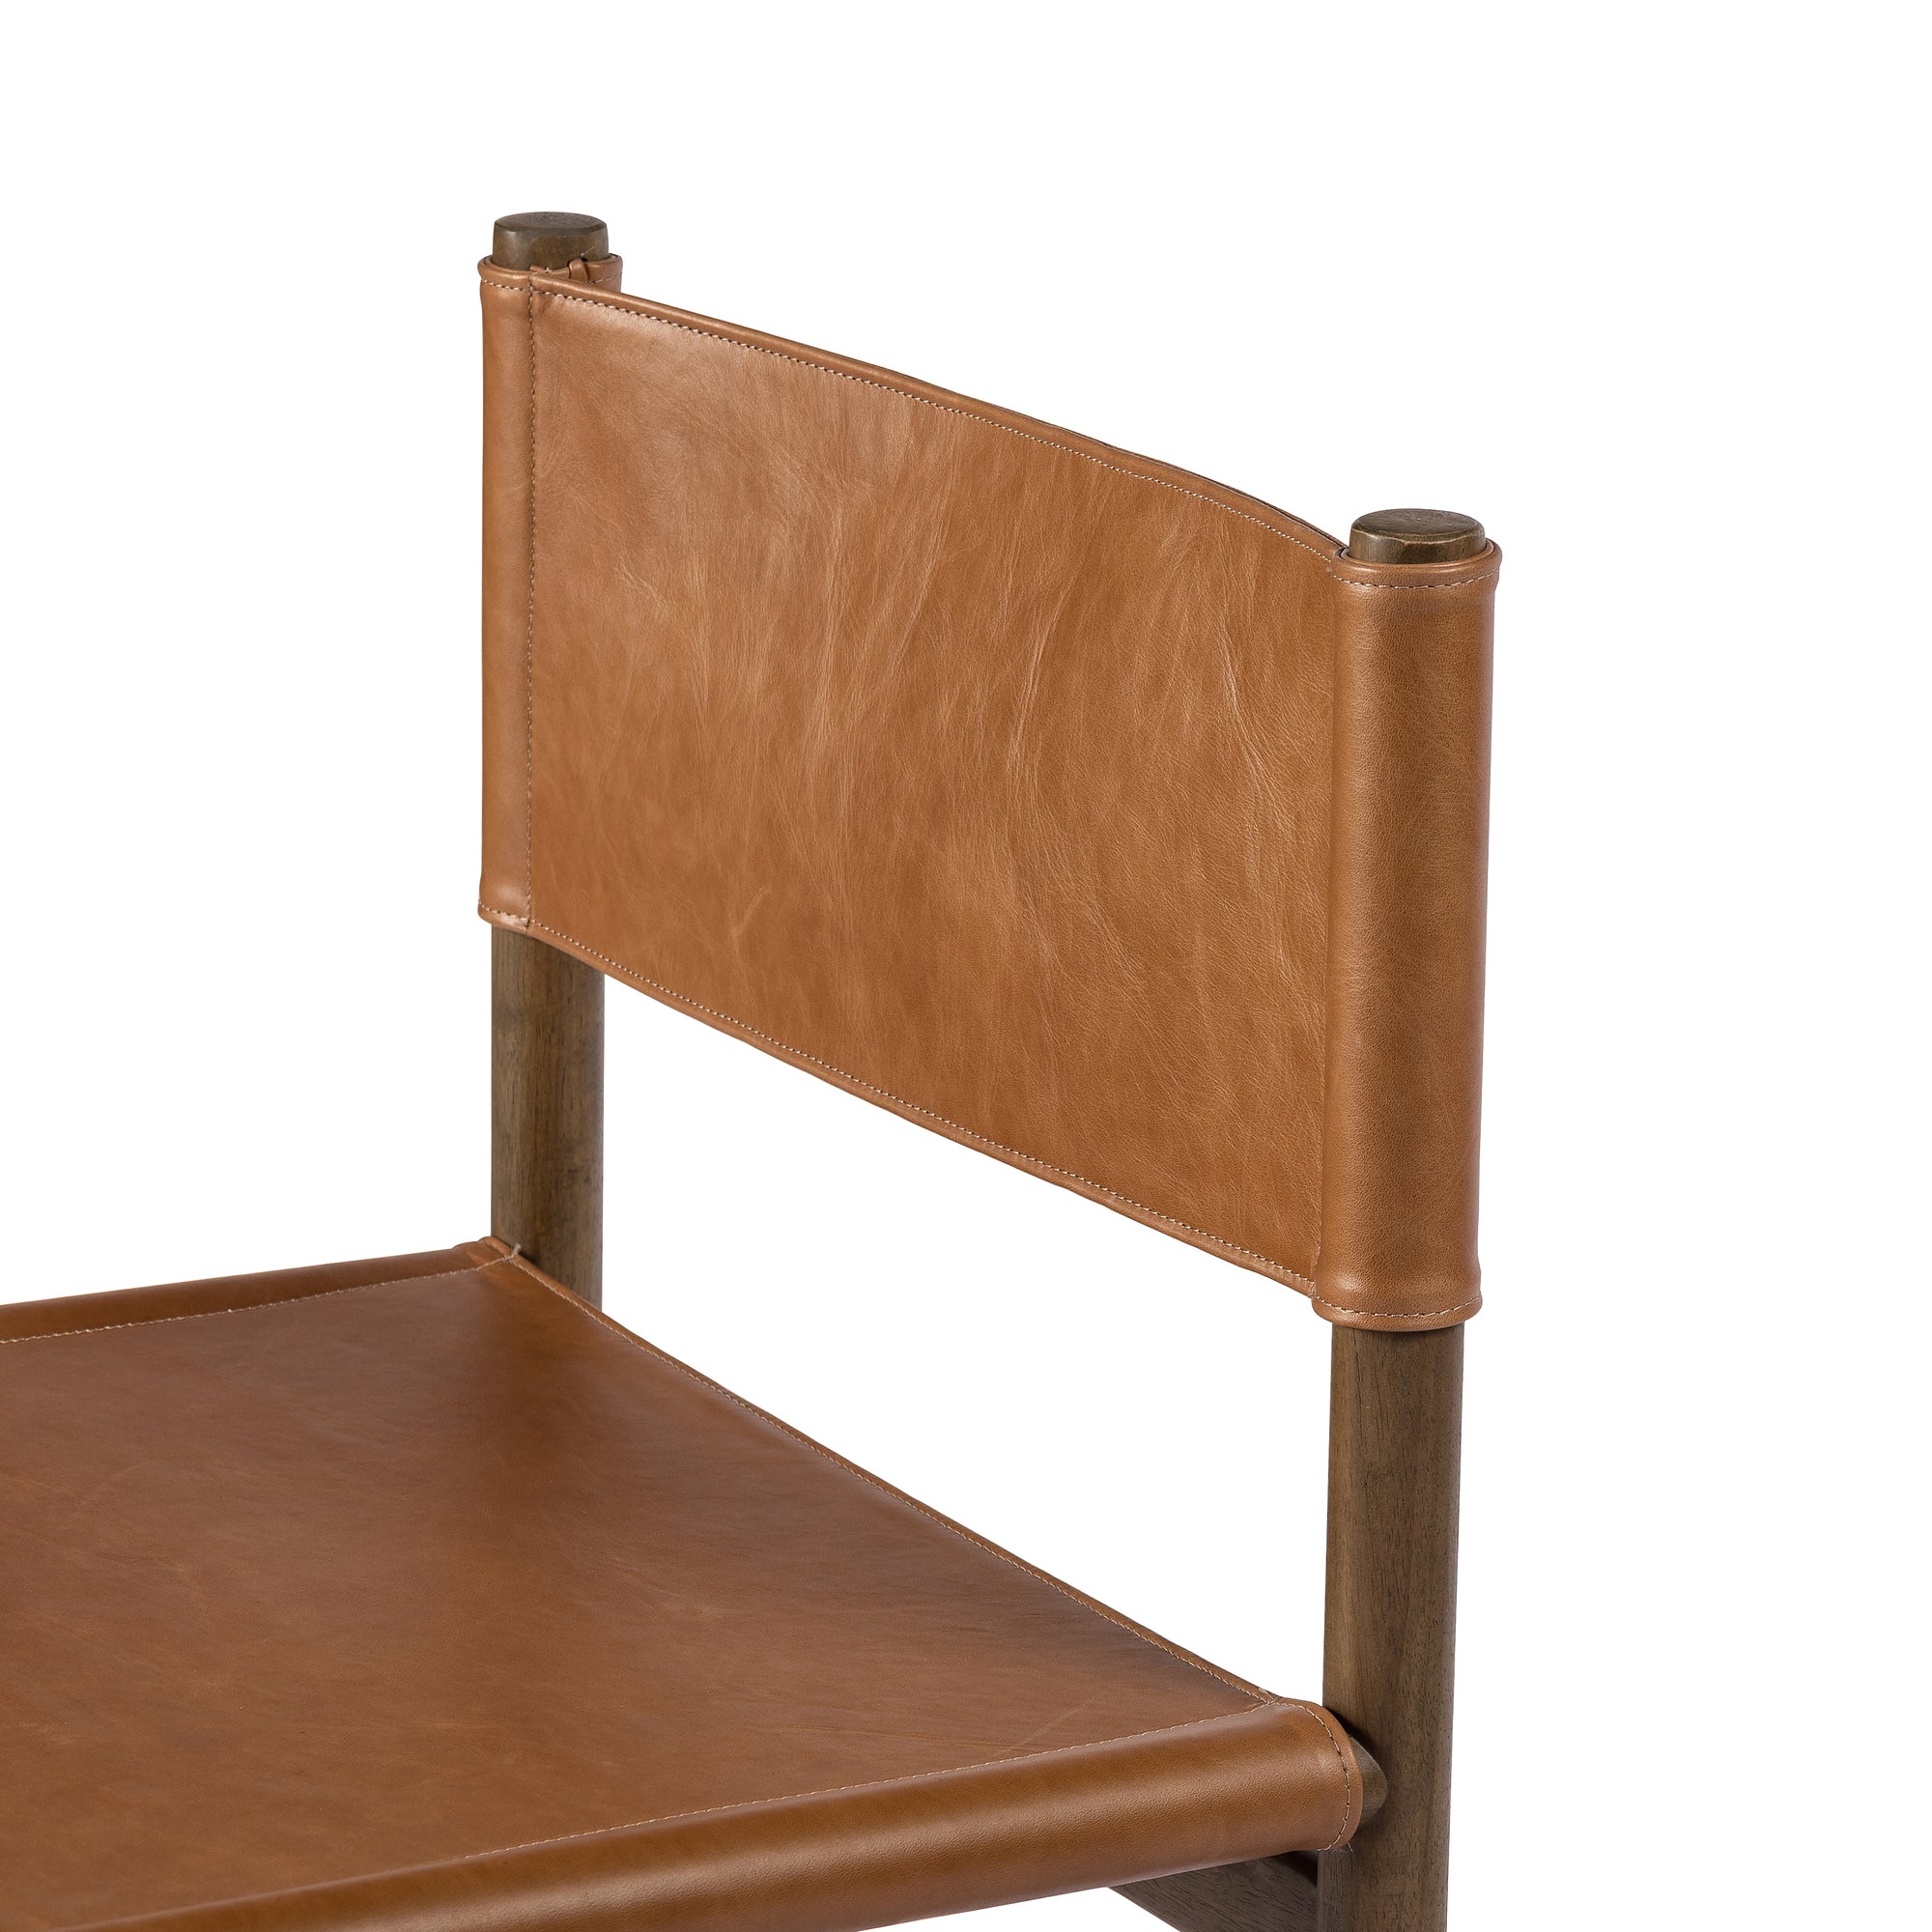 Kena Dining Chair